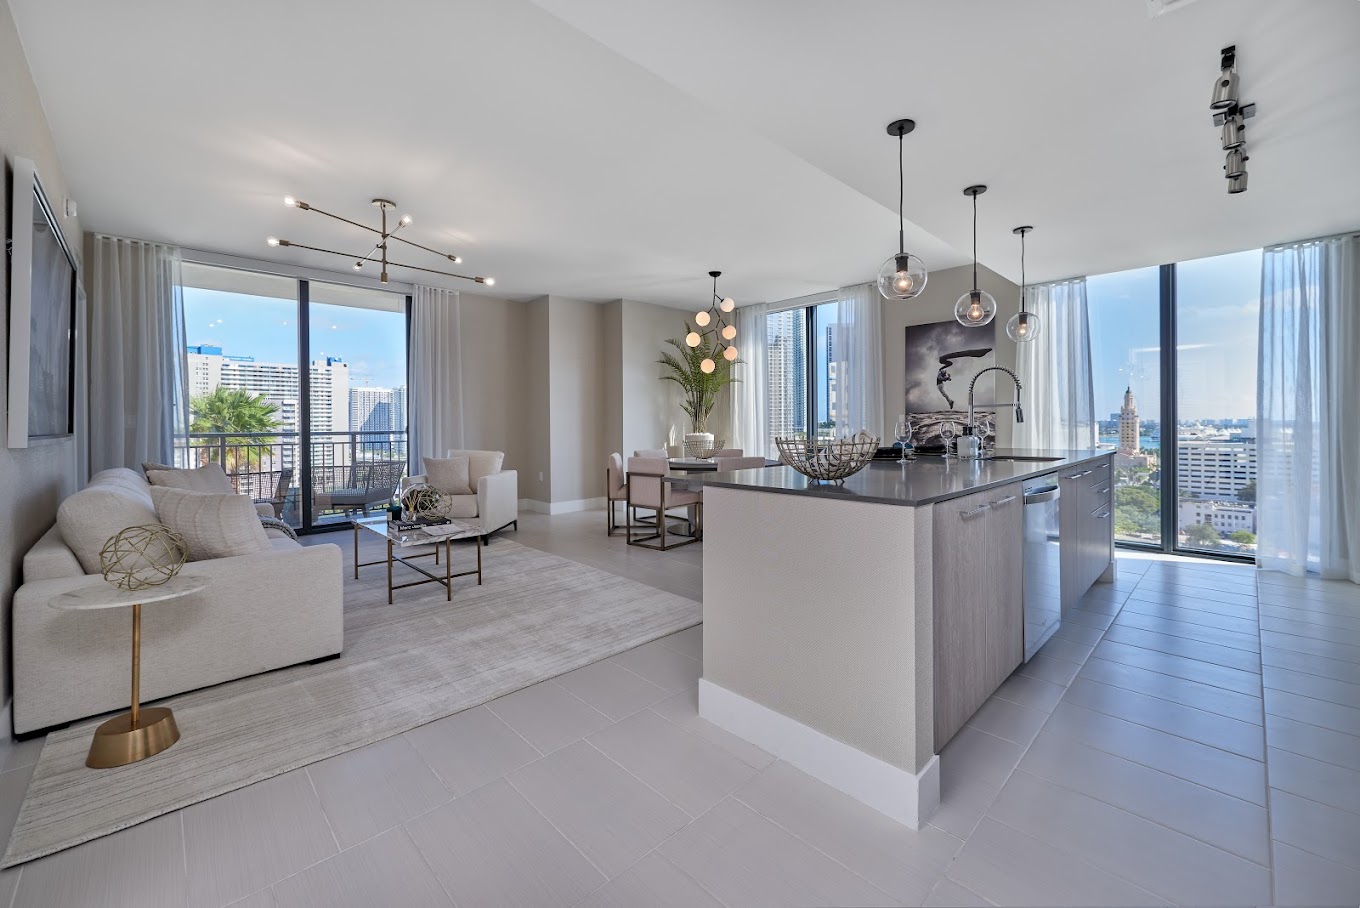 quartz countertops, two tone cabinetry, ceramic tiled flooring, stainless steel appliances